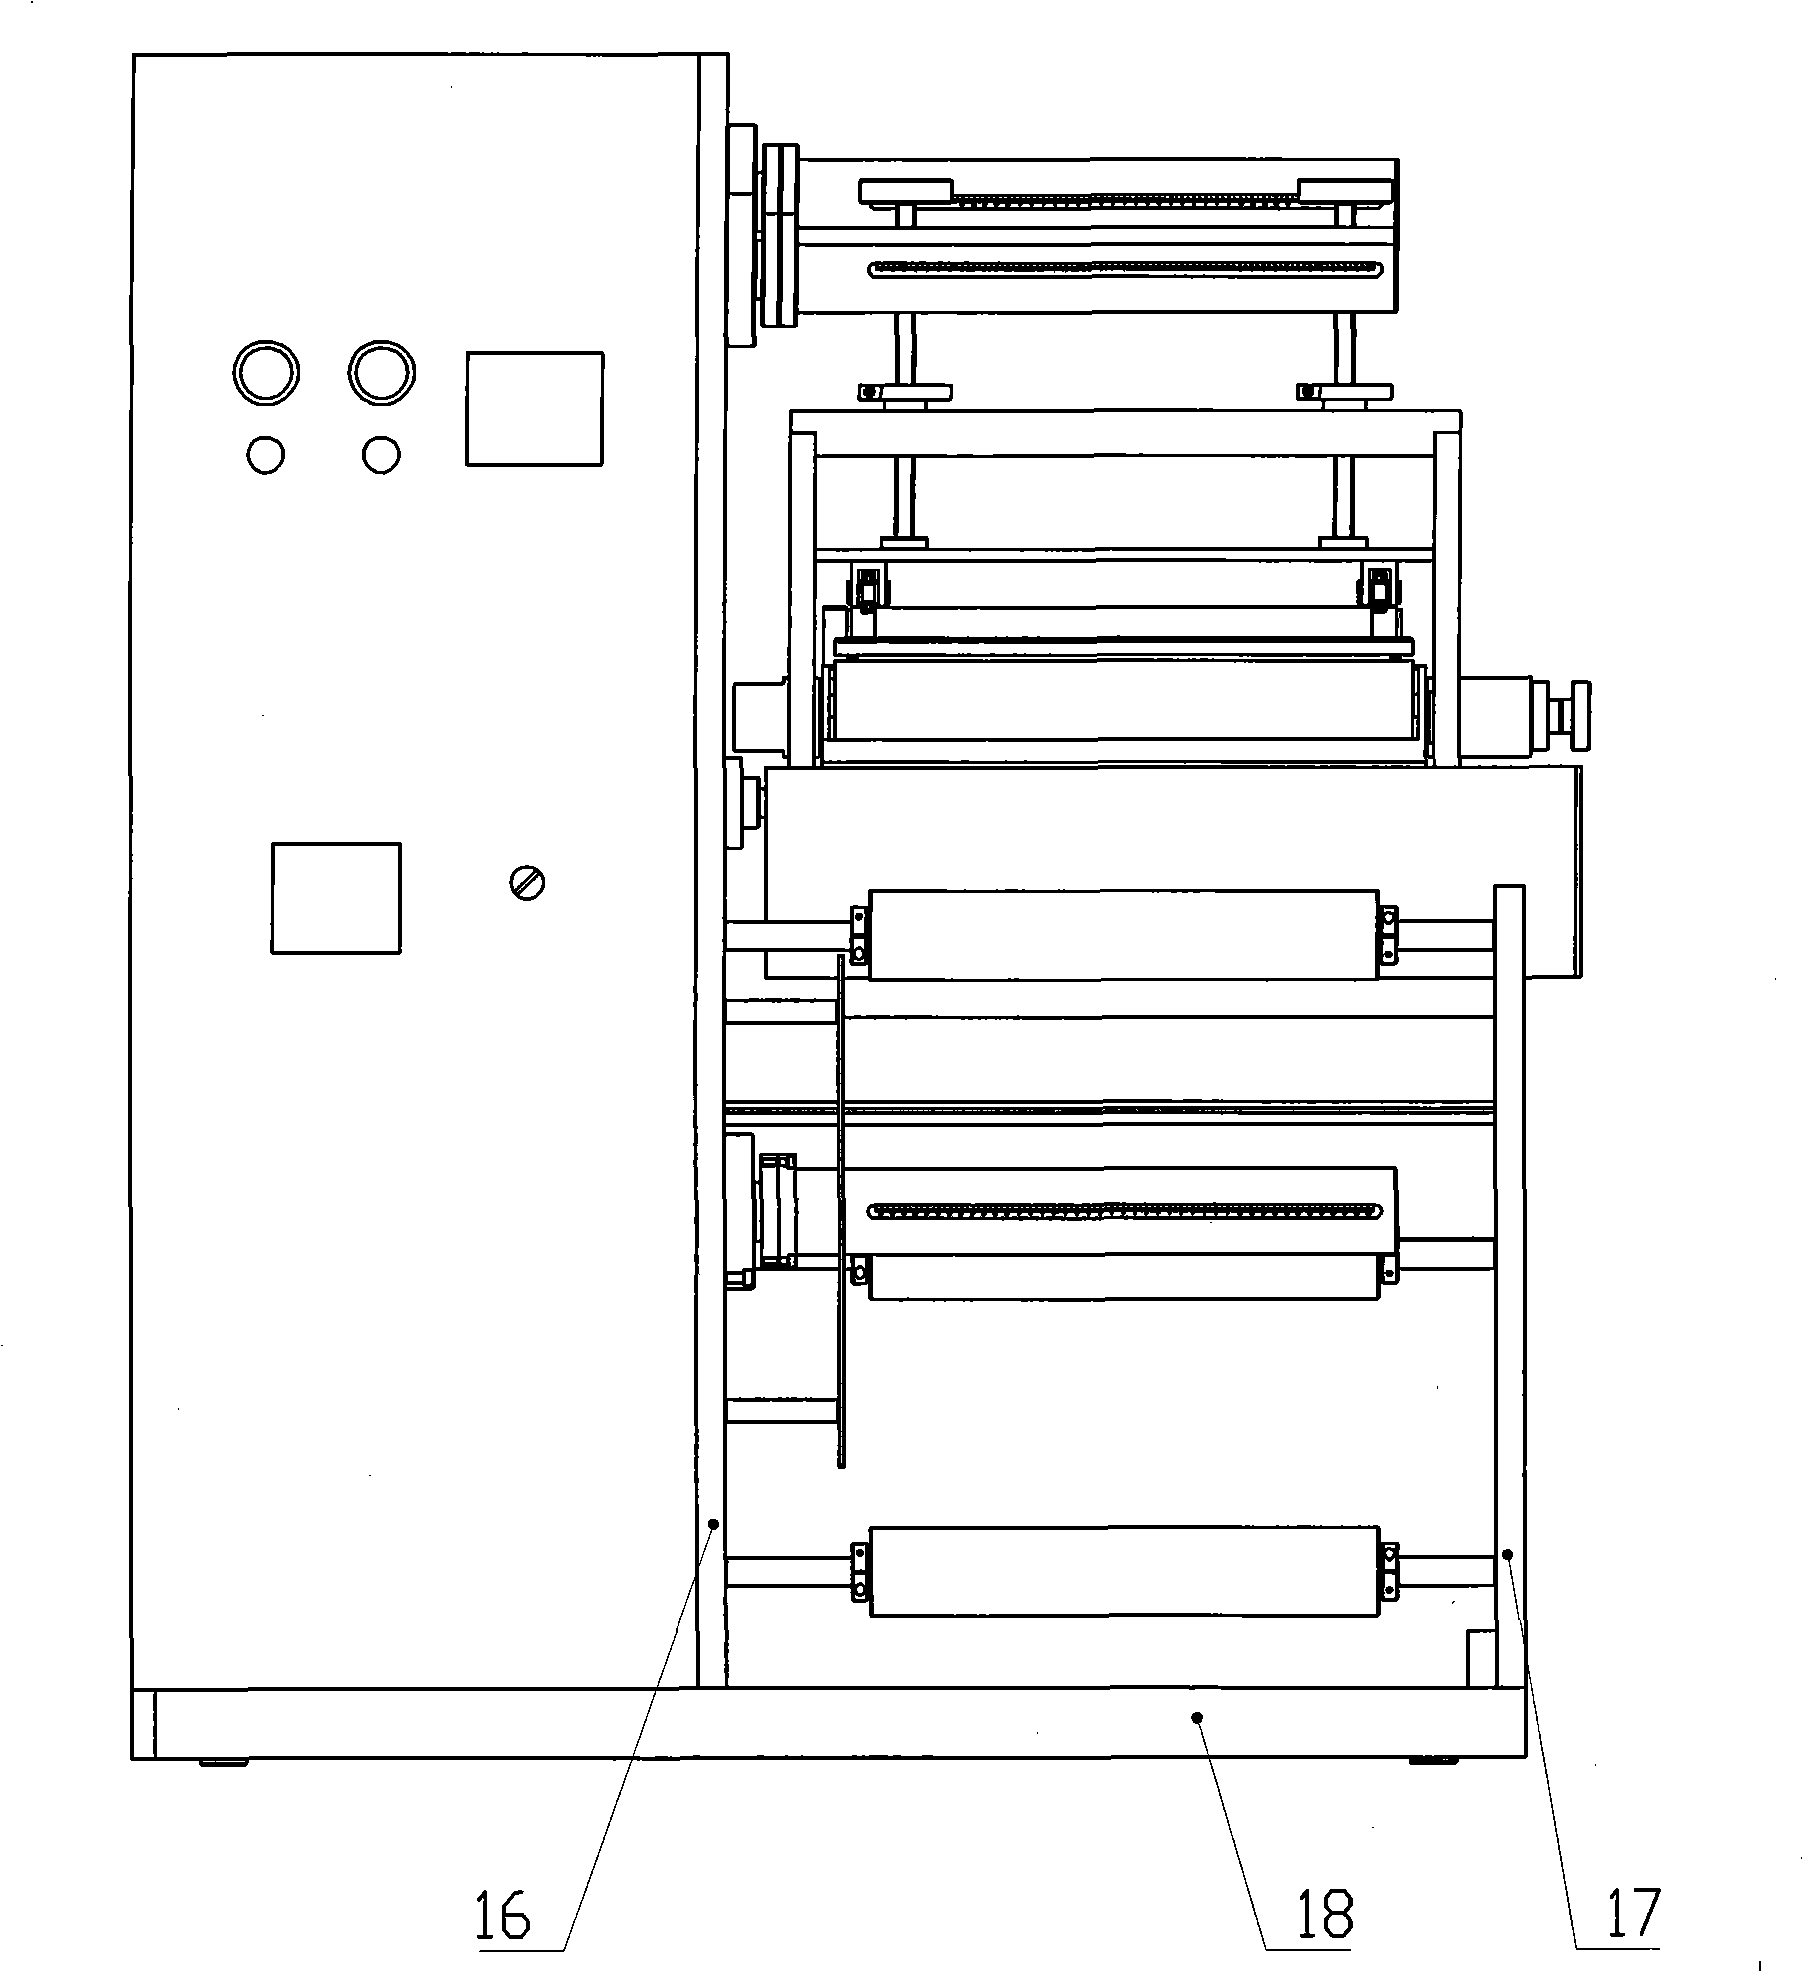 Interchangeable post-press processing system